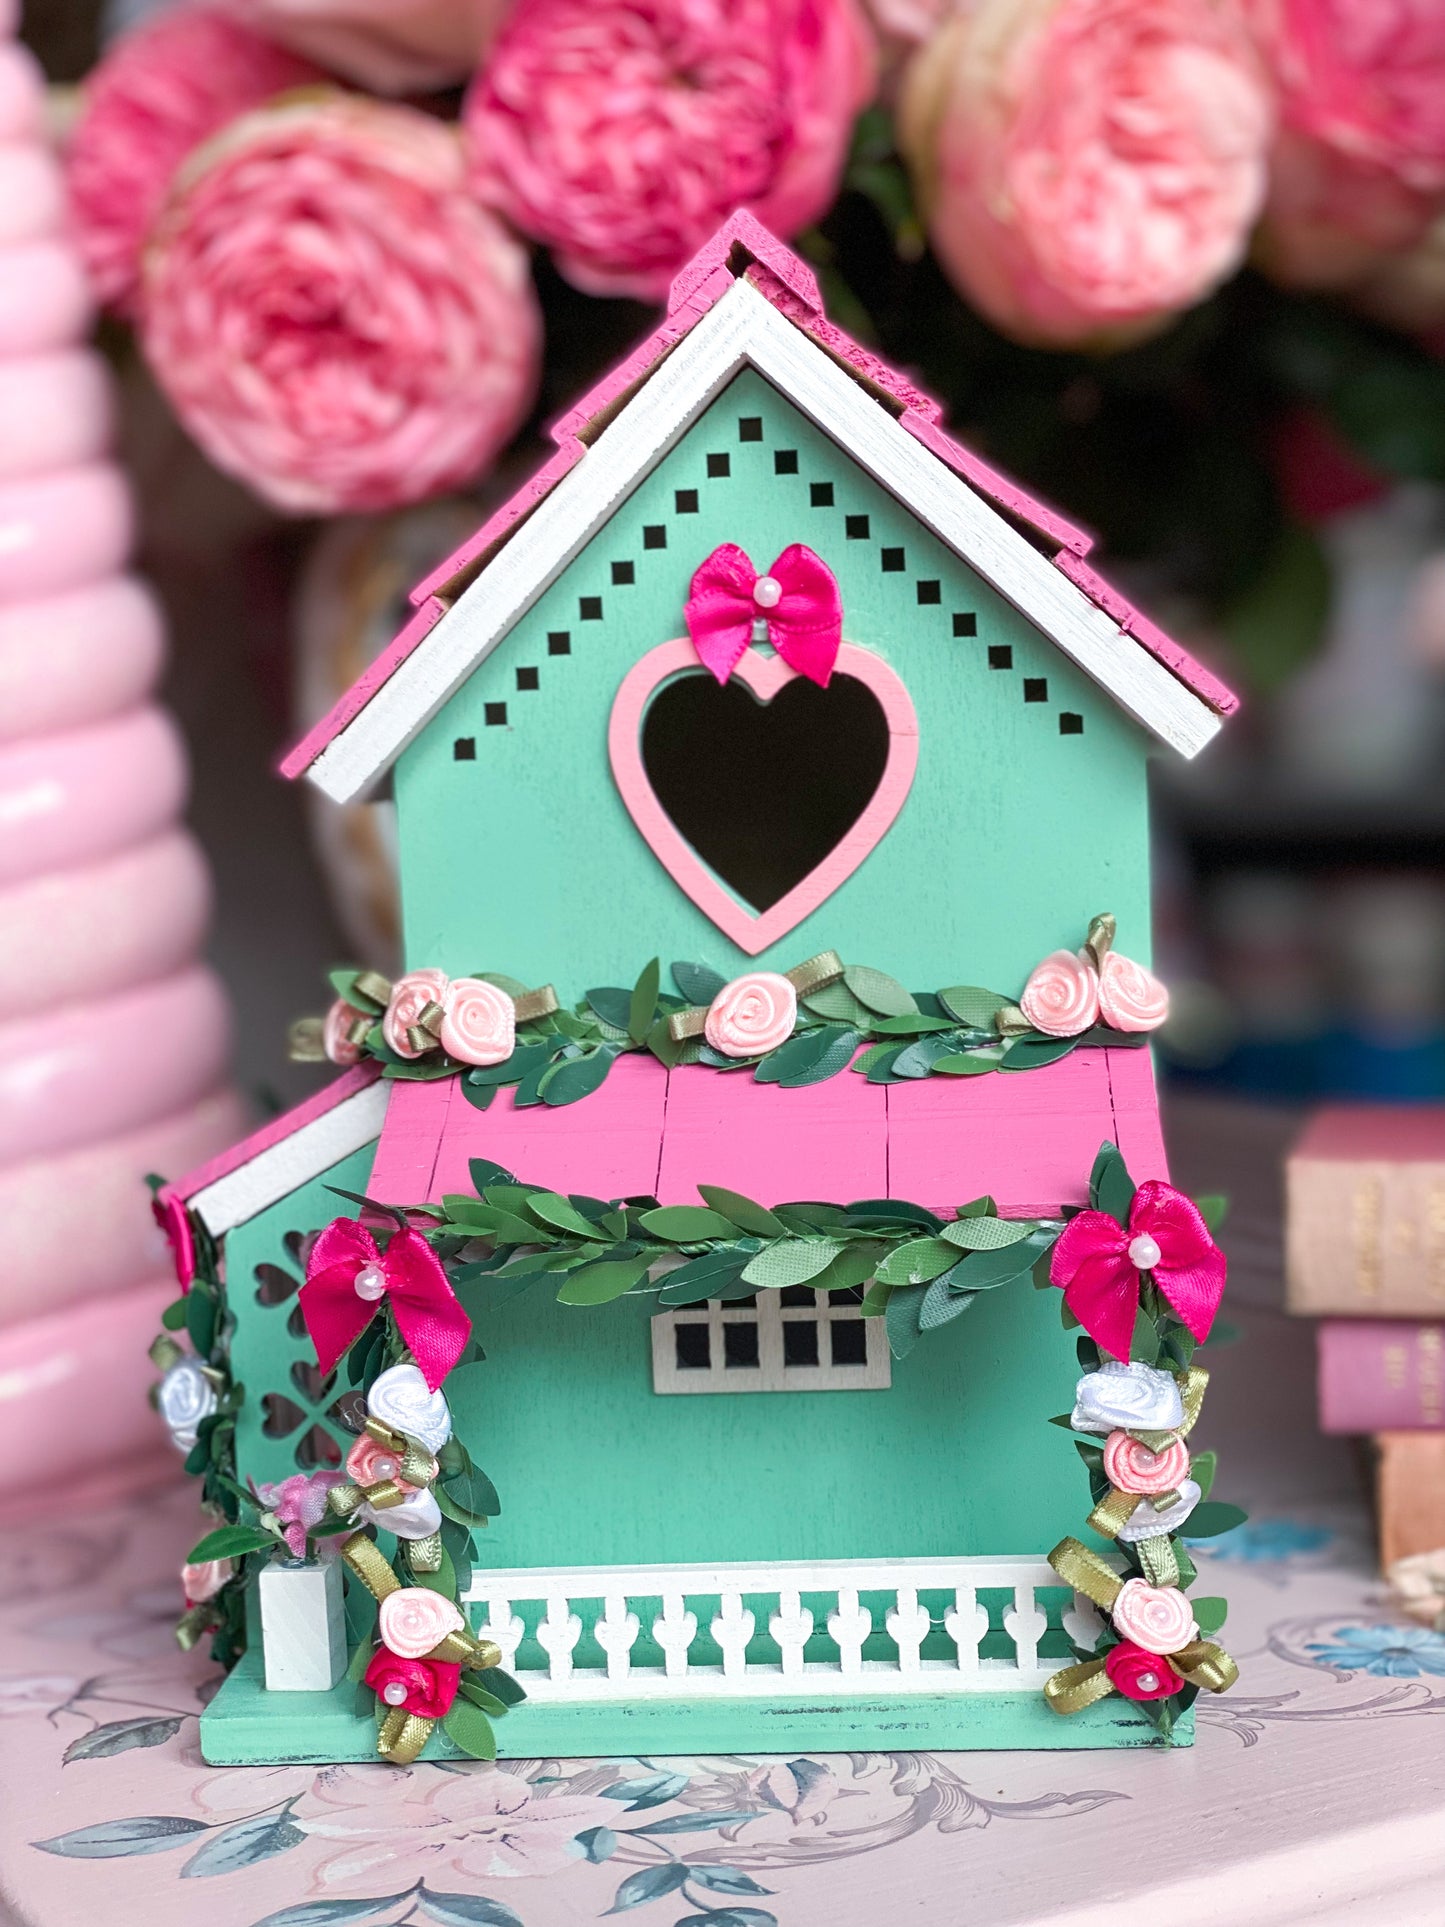 Bespoke Pastel Pink and Green Shabby Chic Floral Spring Easter Village Houses